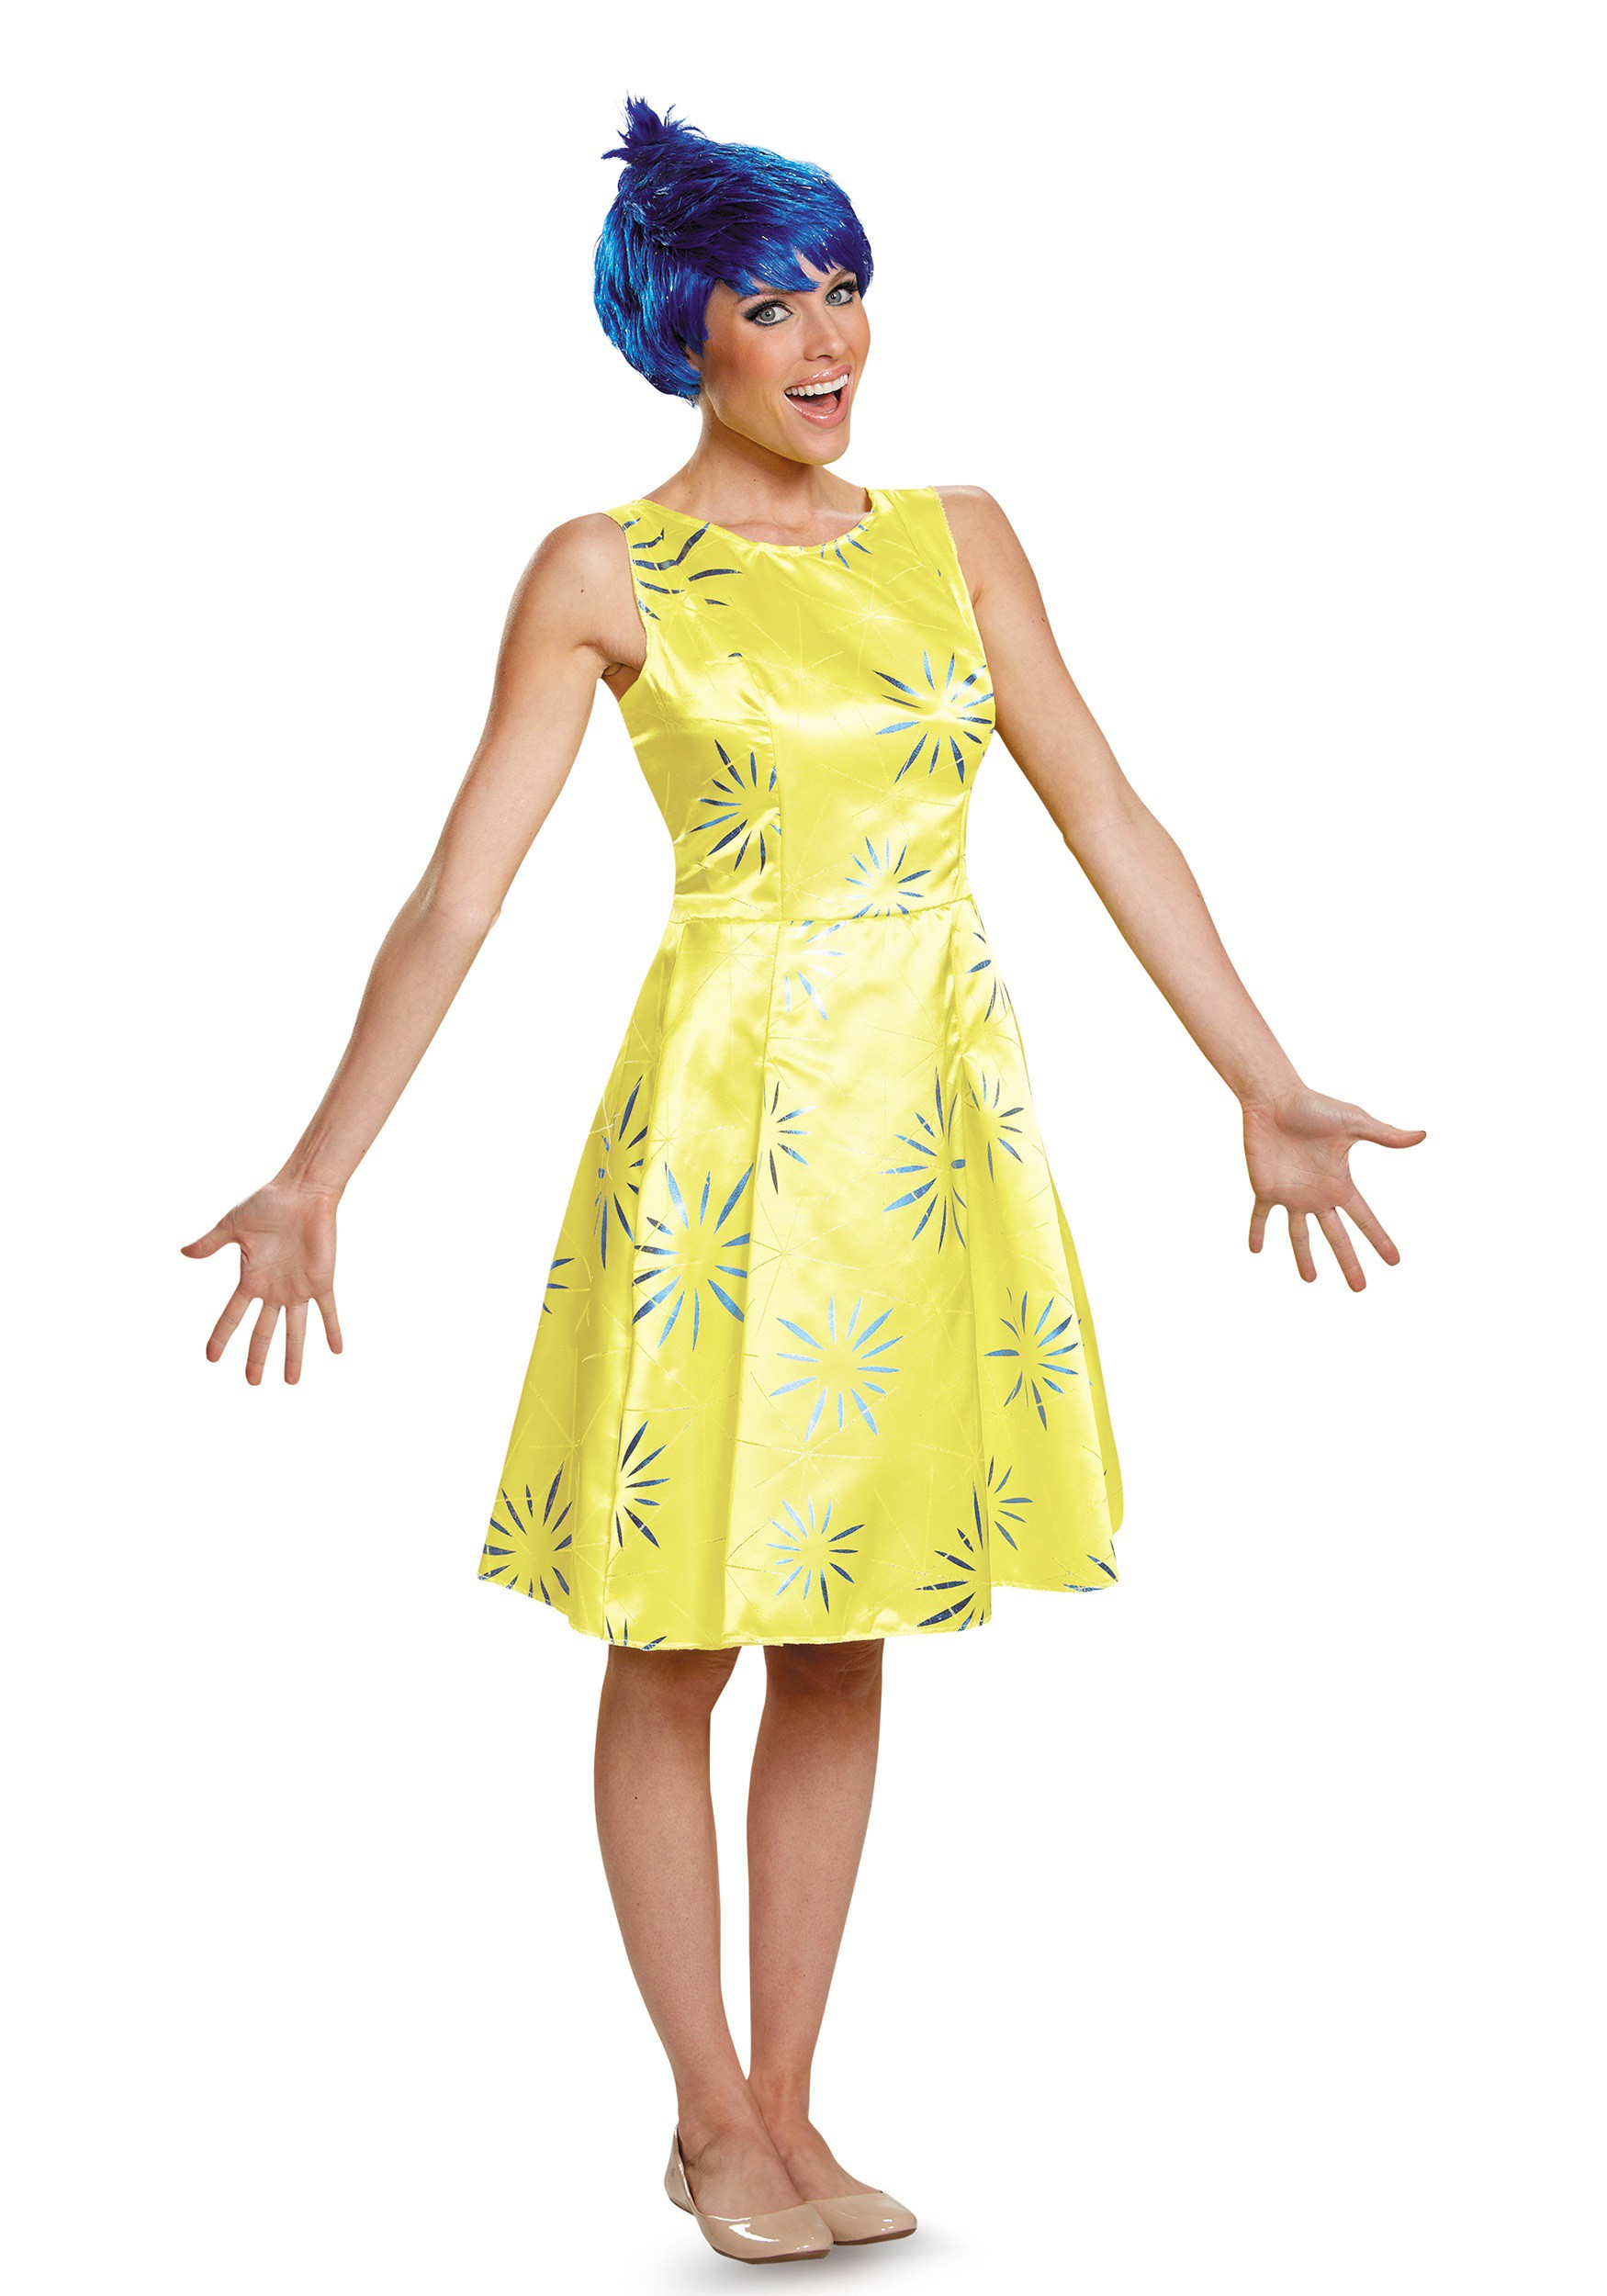 Image of Adult Disney Inside Out Joy Deluxe Costume | Disney Costumes ID DI86954-M